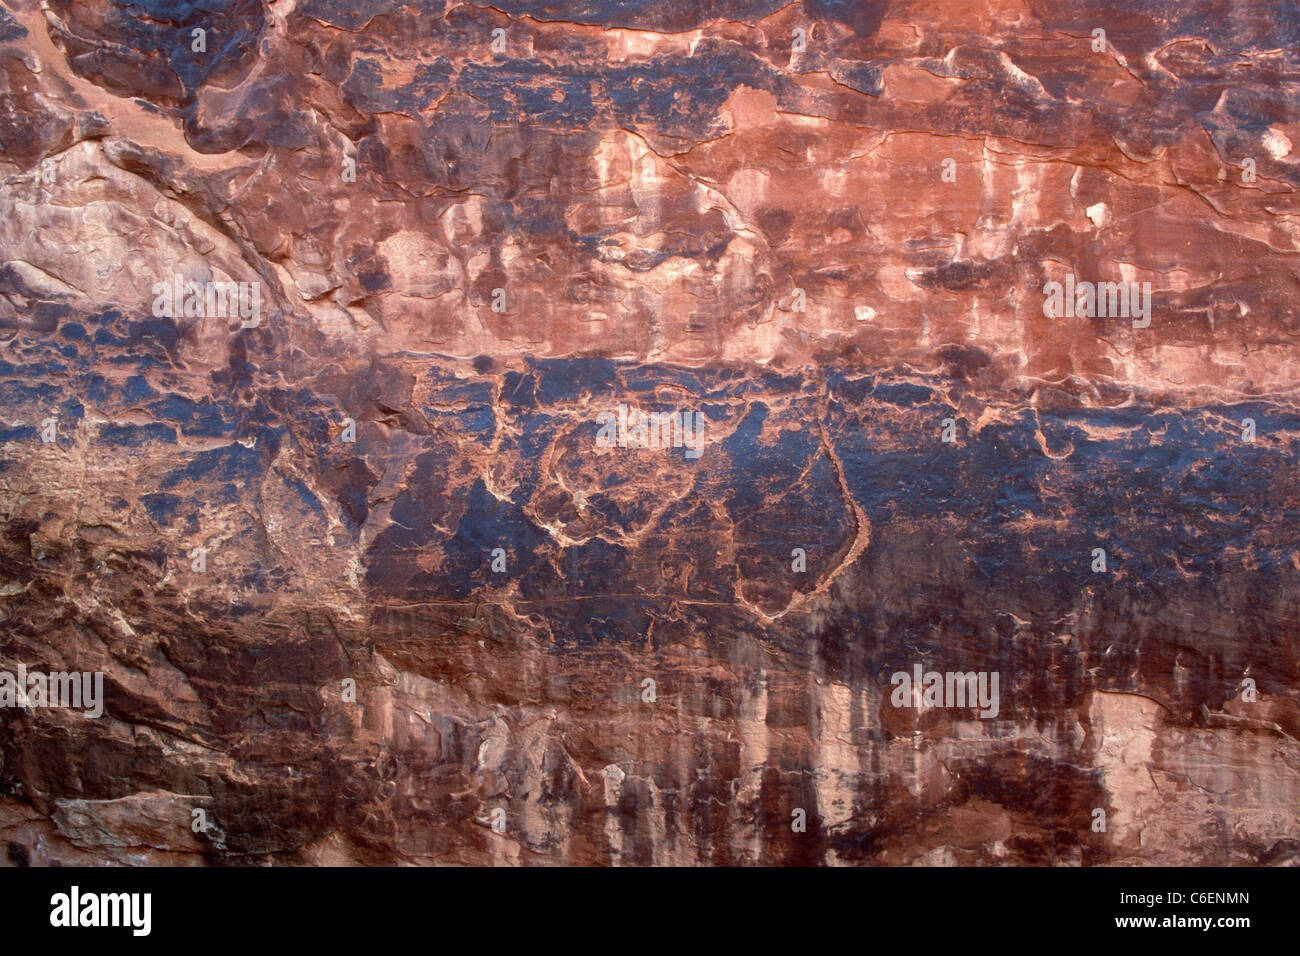 Intricate Navajo Sandstone textures in Utah's Arches National Park. Stock Photo